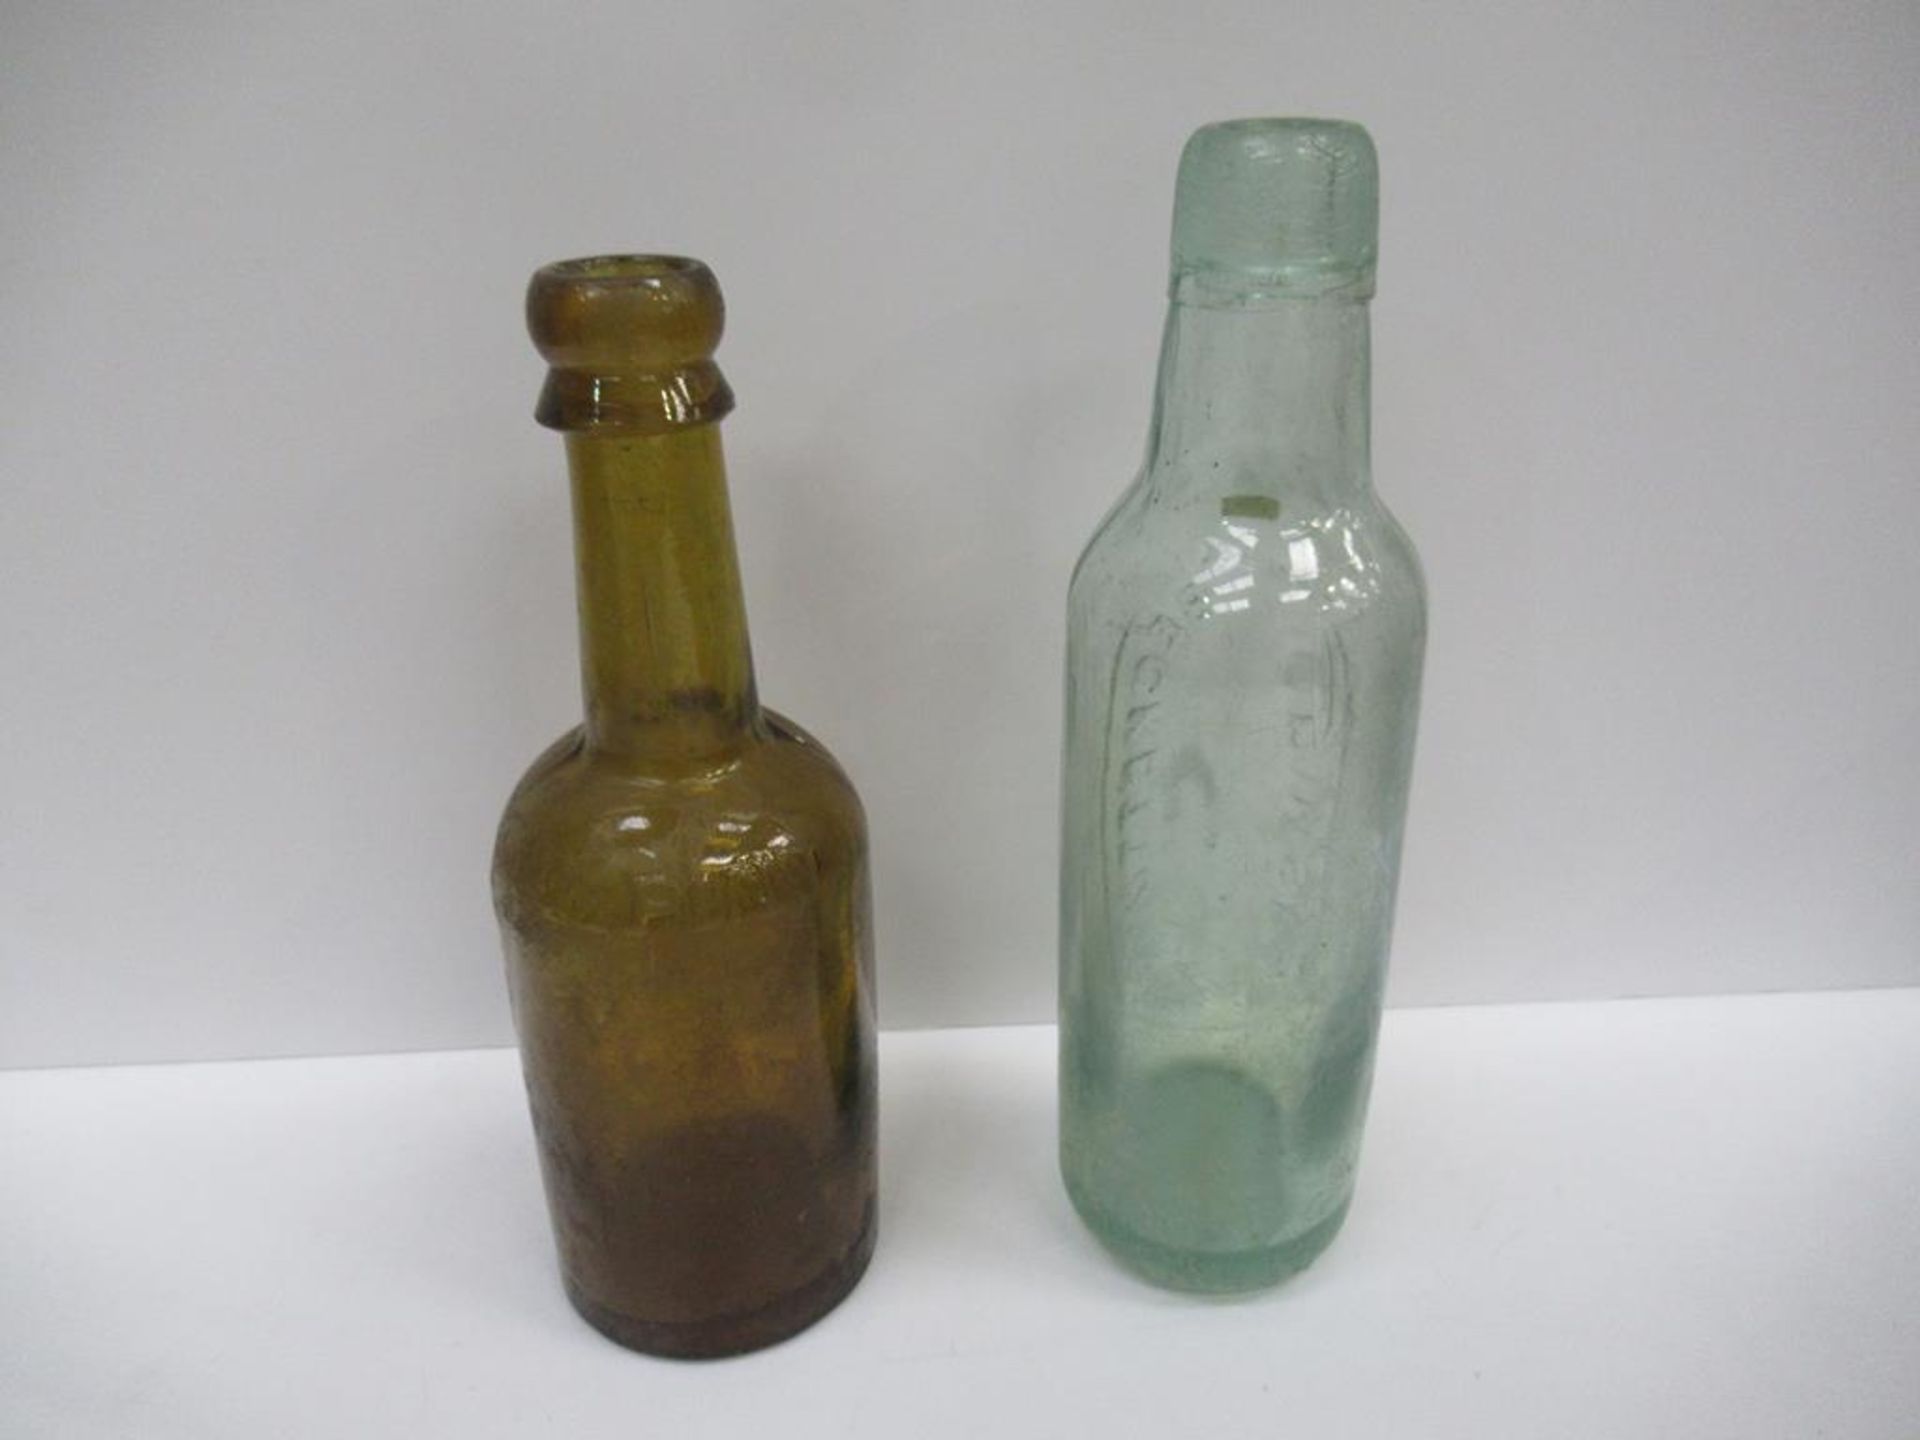 5x Grimsby Herbert Coulton (3) E.W Beckett & Co (1) and Beckett & Sons (1) bottles (4x coloured) - Image 15 of 20